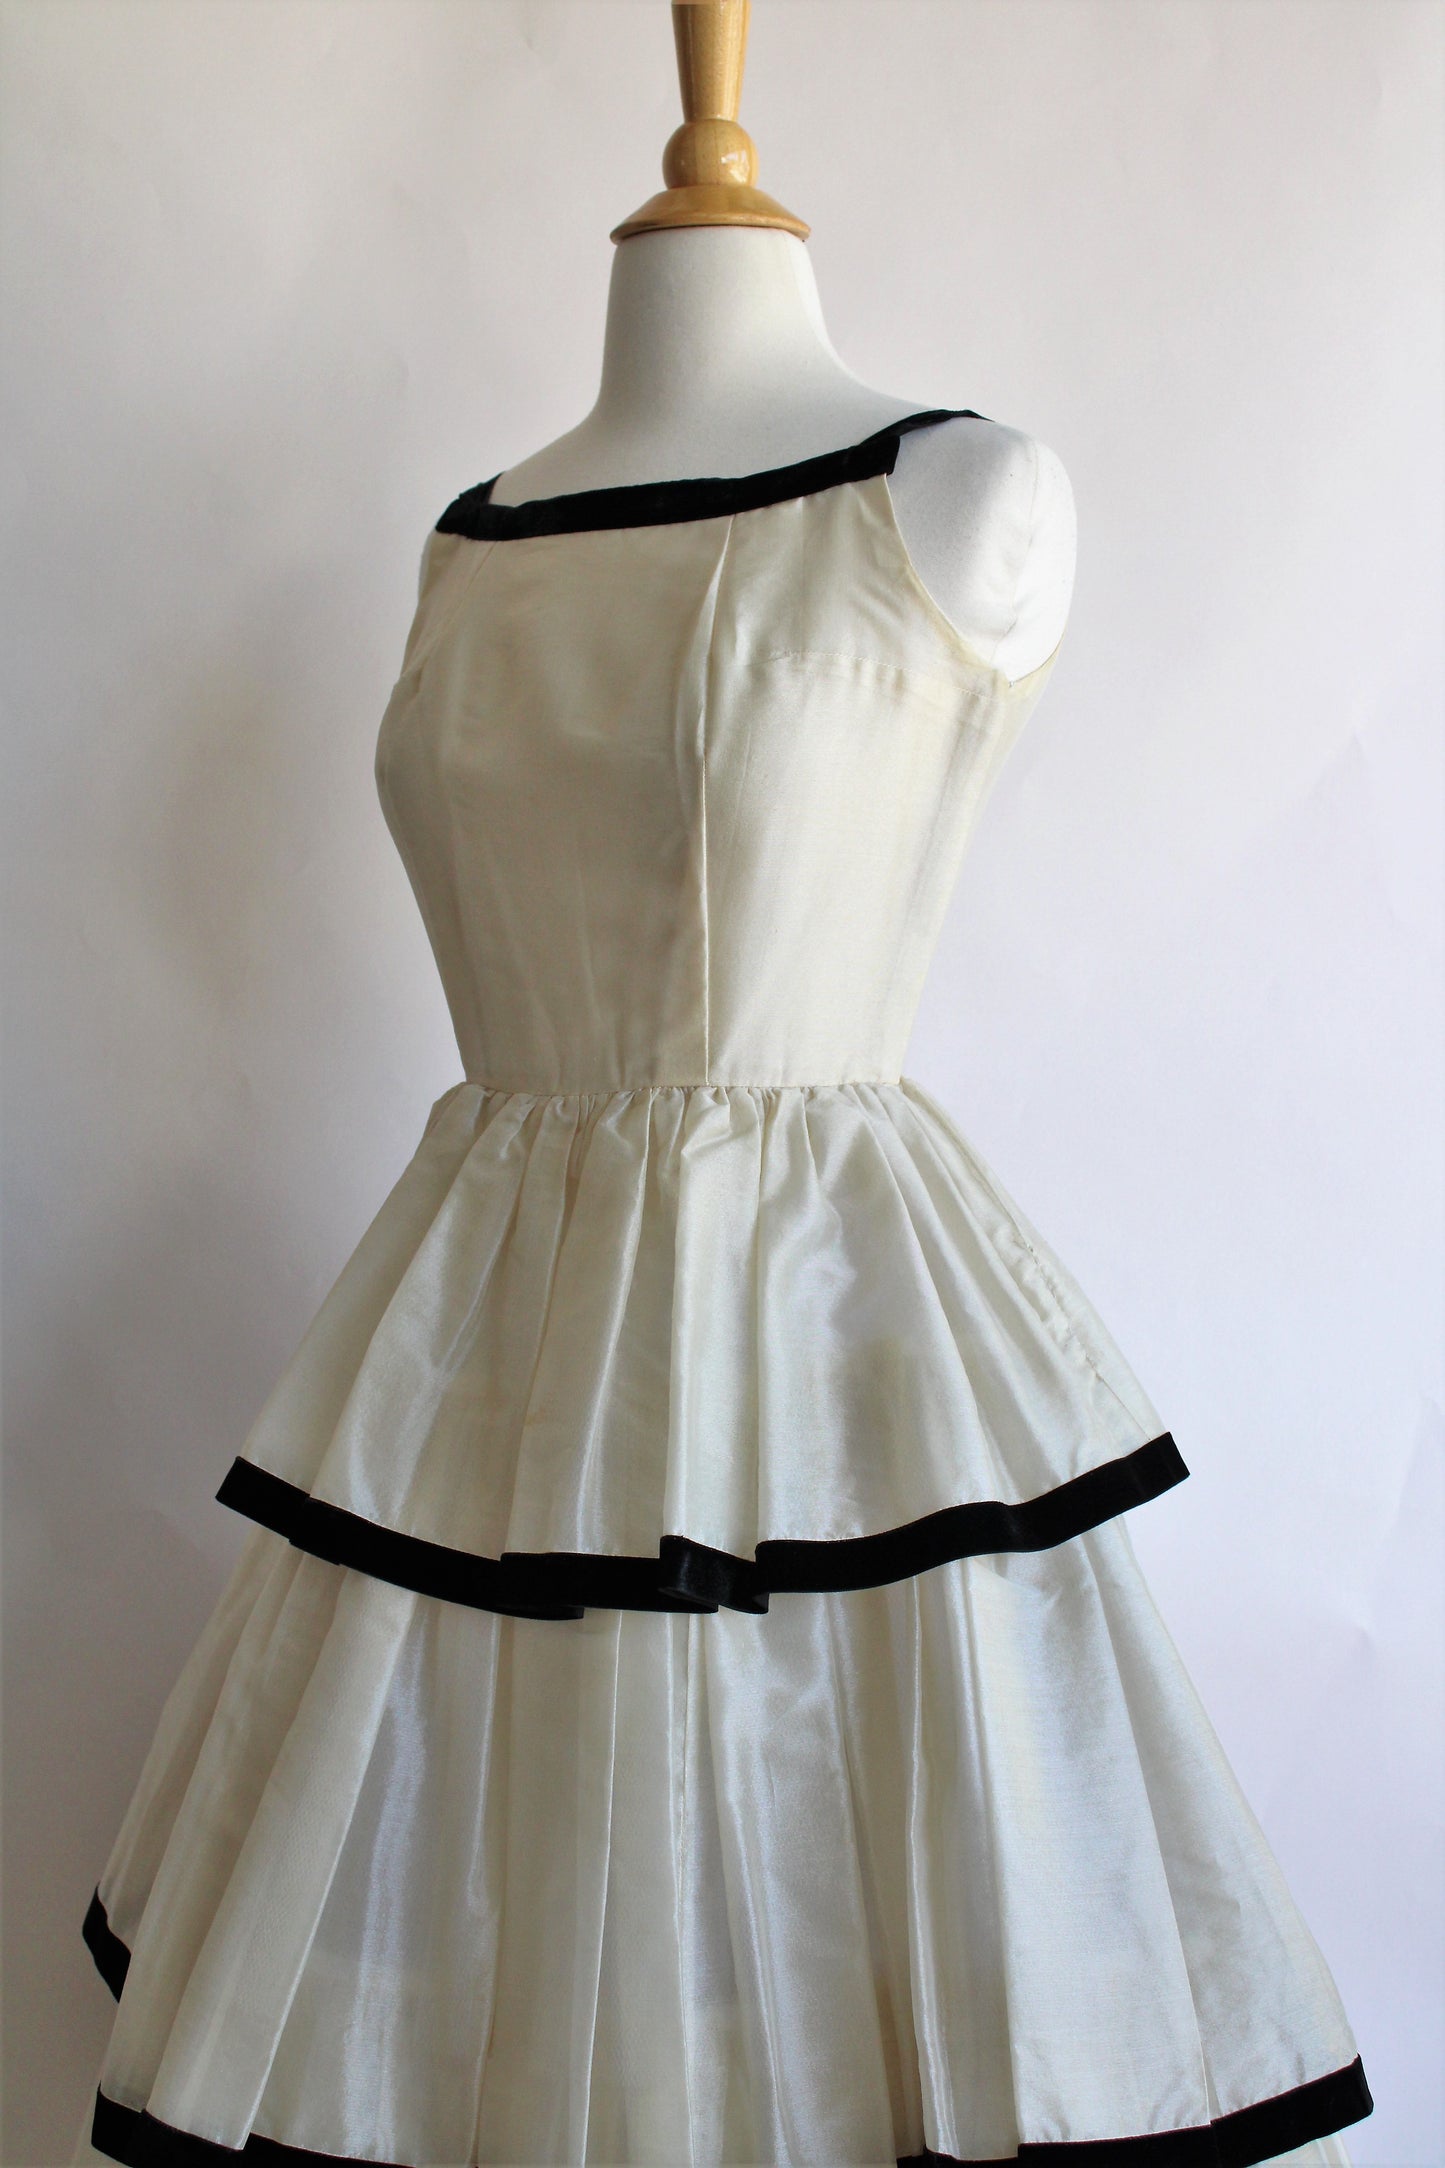 Vintage 1950s Fit and Flare Party Dress in Ivory with Black Velvet Trim